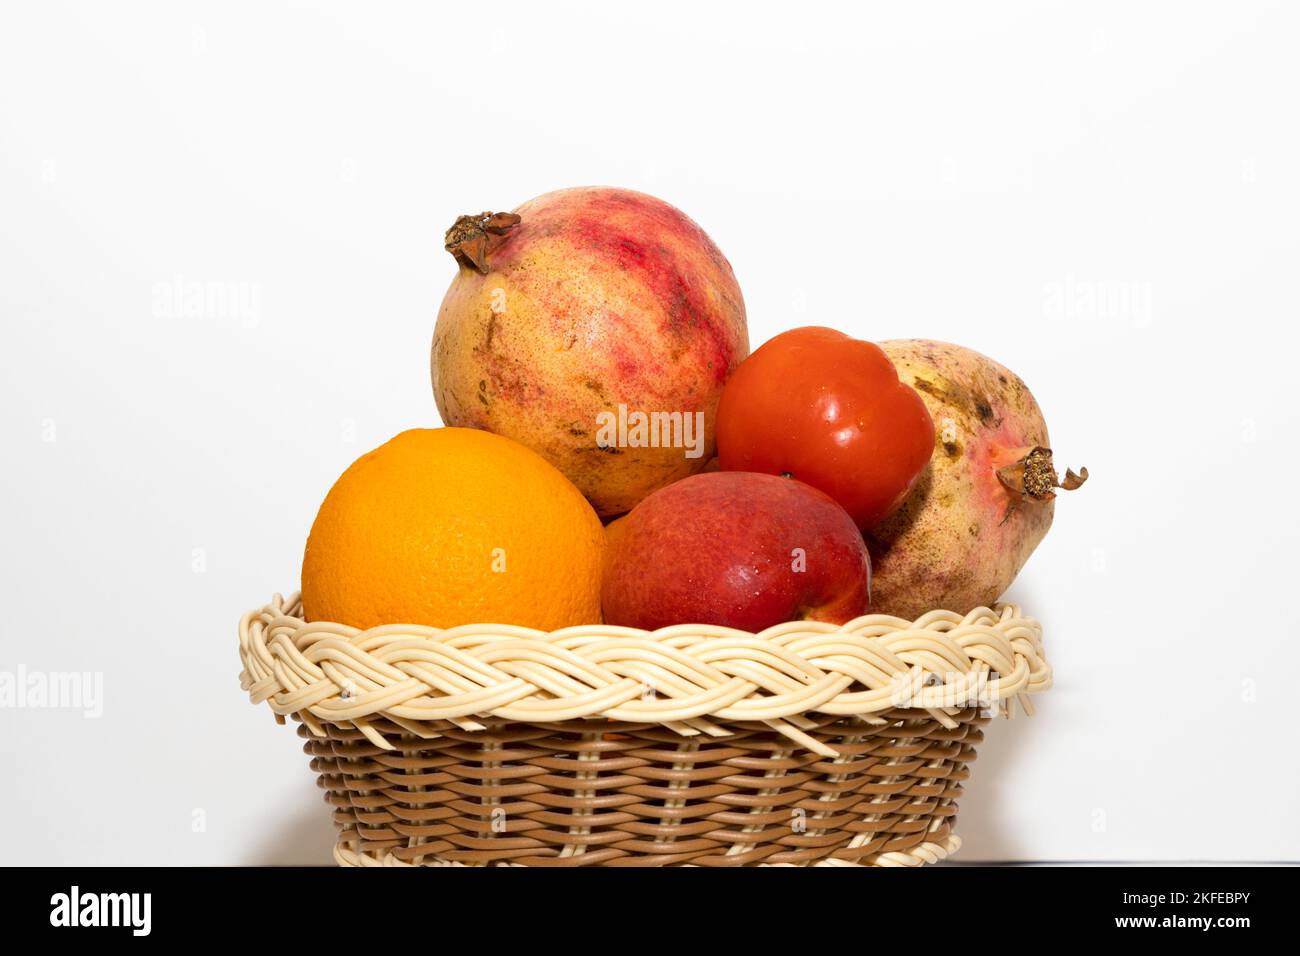 Closeup Image Of Fresh Fruits In Basket In White Background Stock Photo